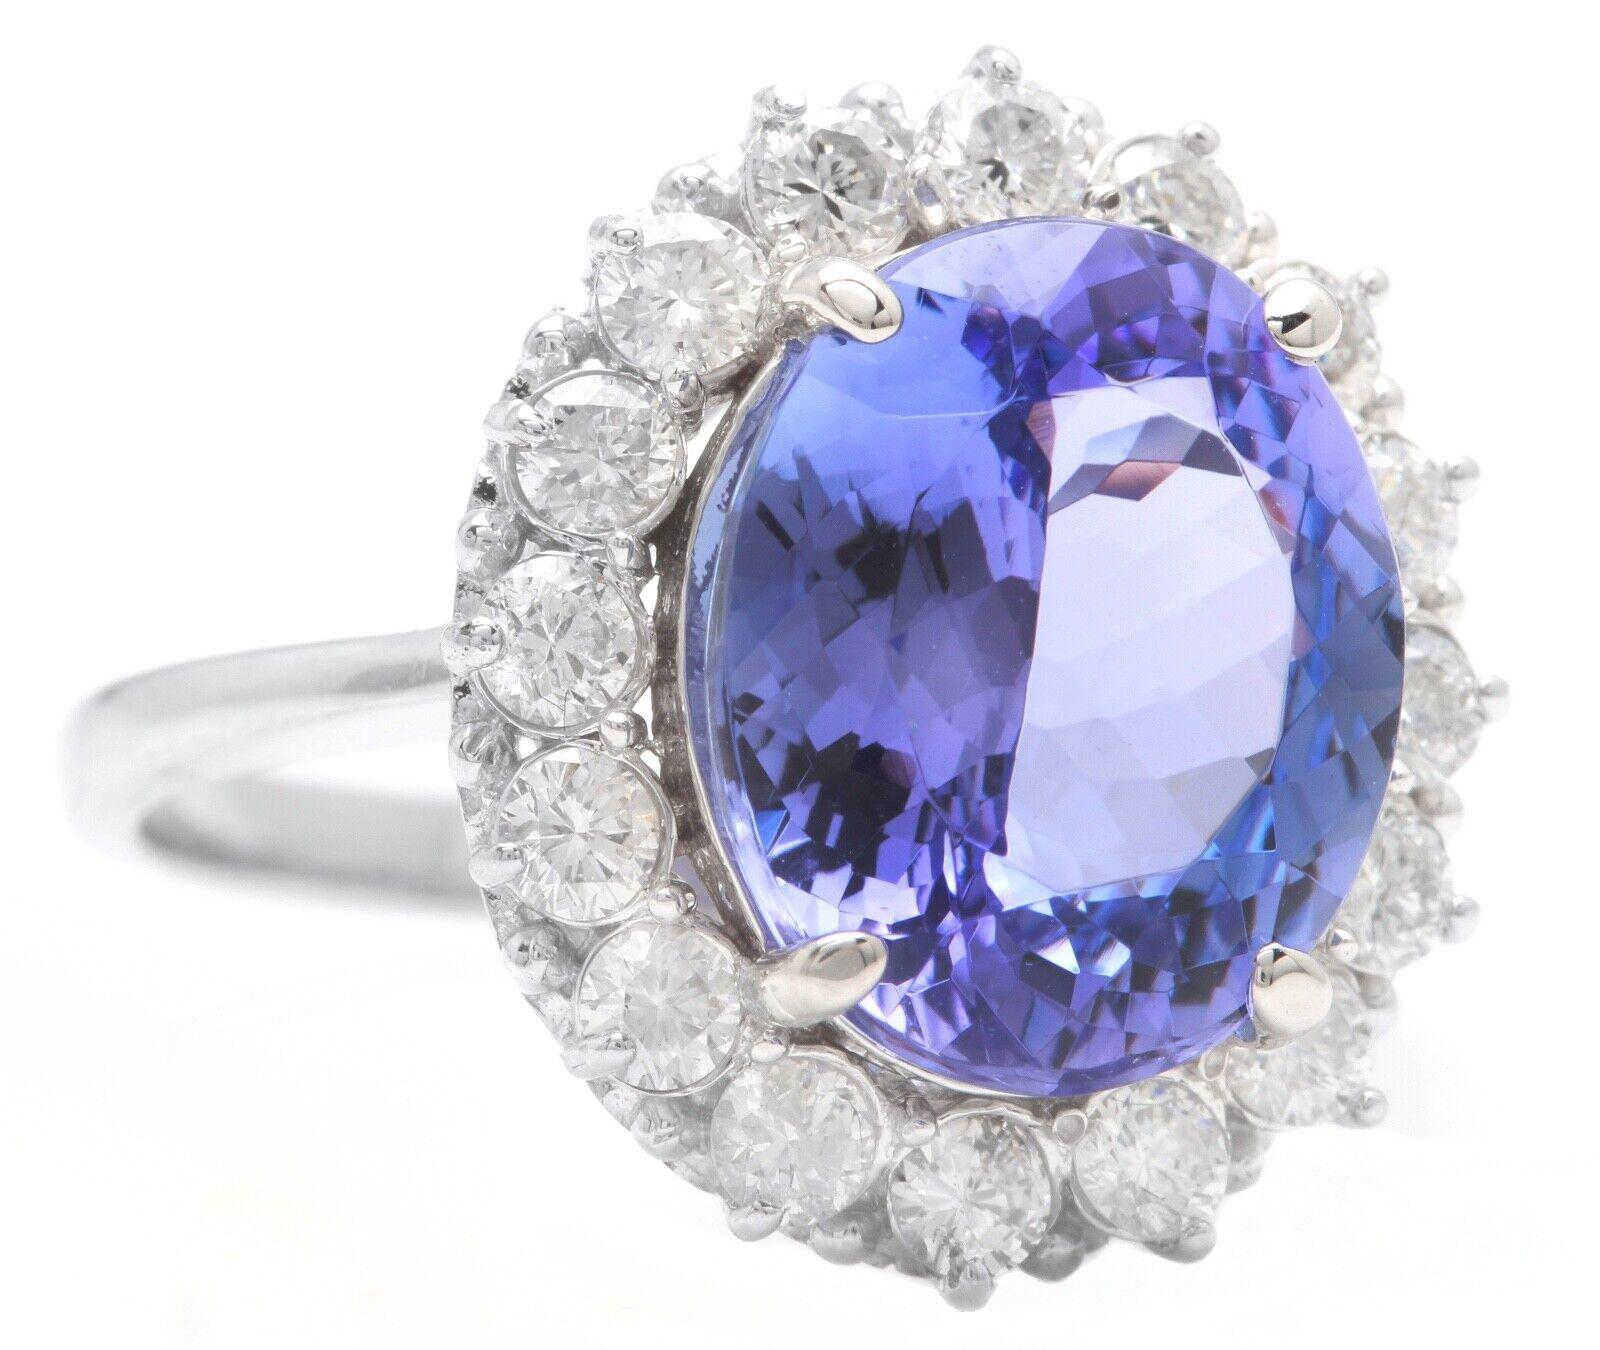 10.30 Carats Natural Very Nice Looking Tanzanite and Diamond 14K Solid White Gold Ring

Suggested Replacement Value: Approx.  $10,000.00

Total Natural Oval Cut Tanzanite Weight is: Approx. 9.00 Carats 

Tanzanite Measures: Approx.  14.00 x 12.00mm
